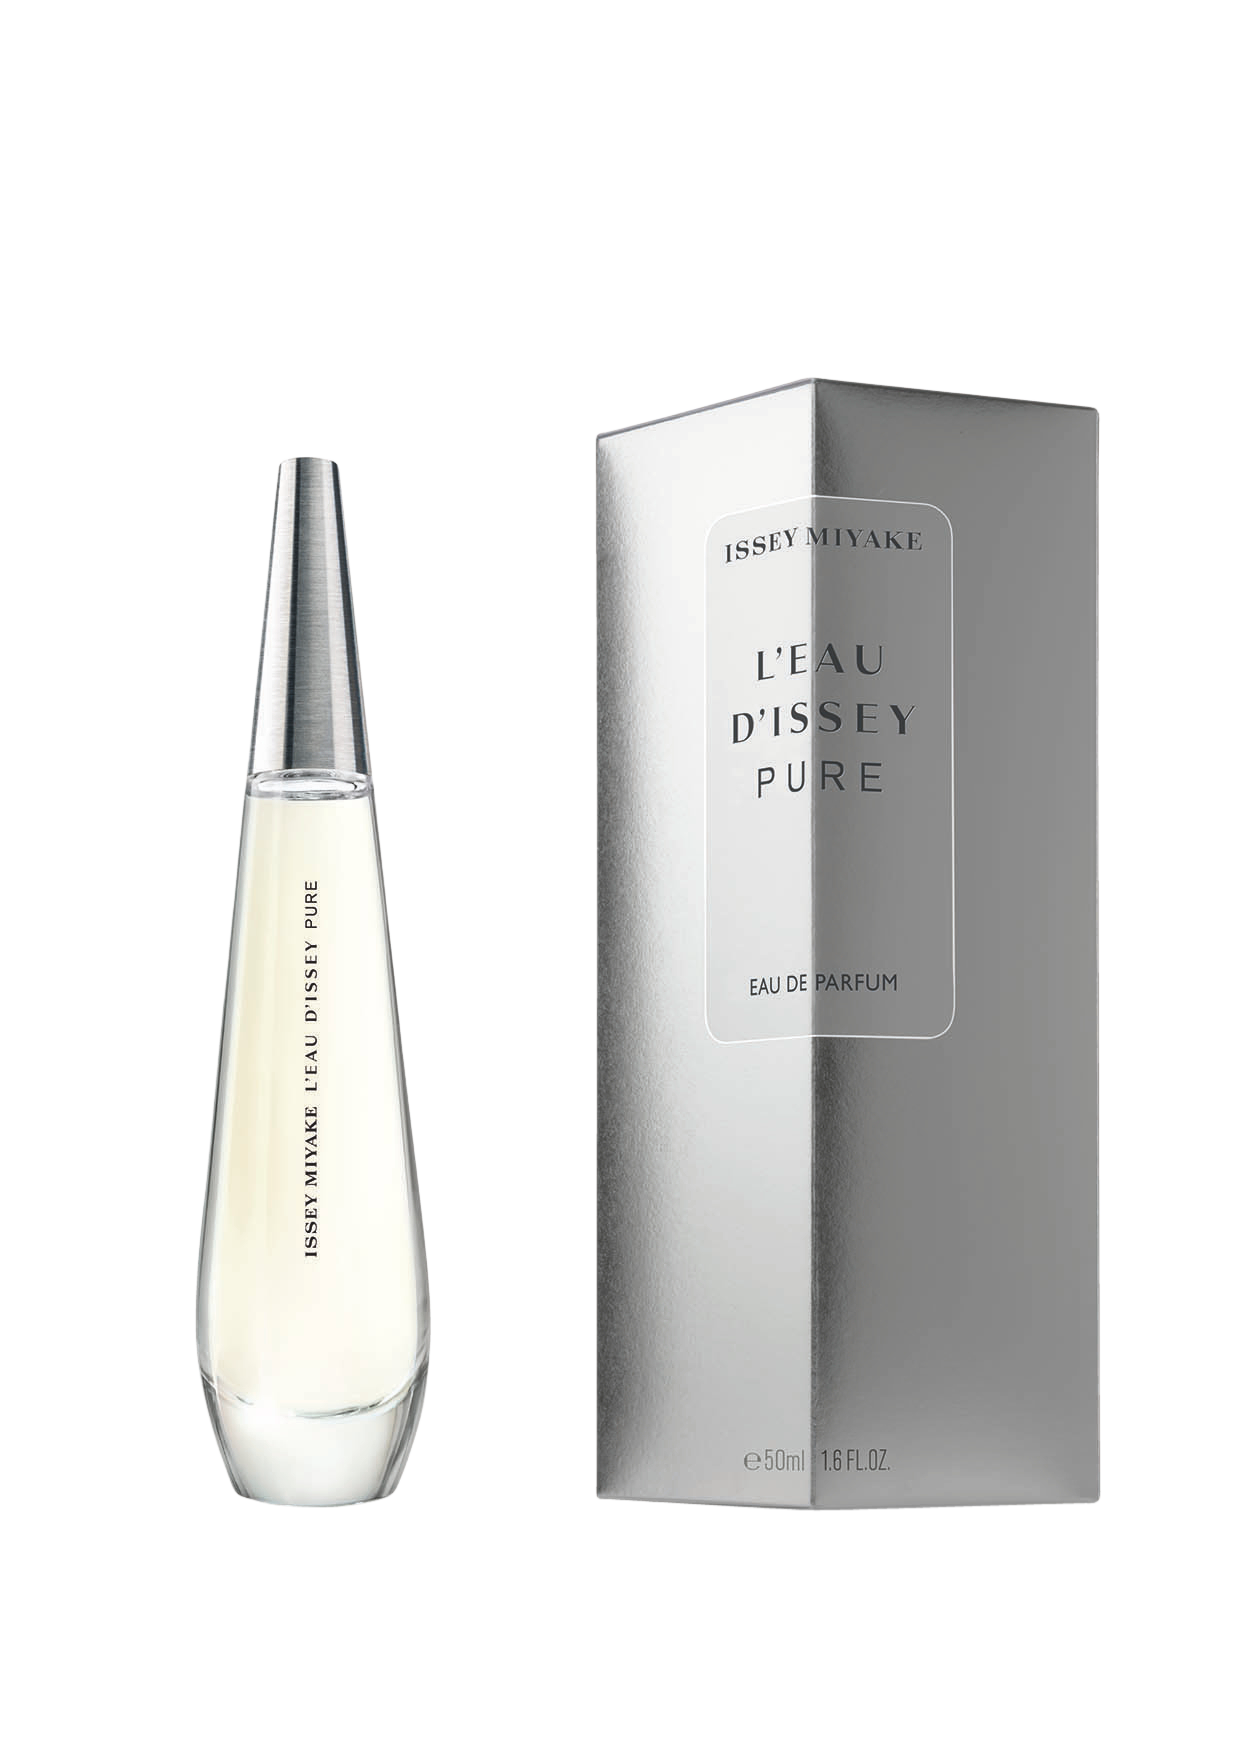 L Eau D Issey Pure Edp 50 ml, Issey Miyake